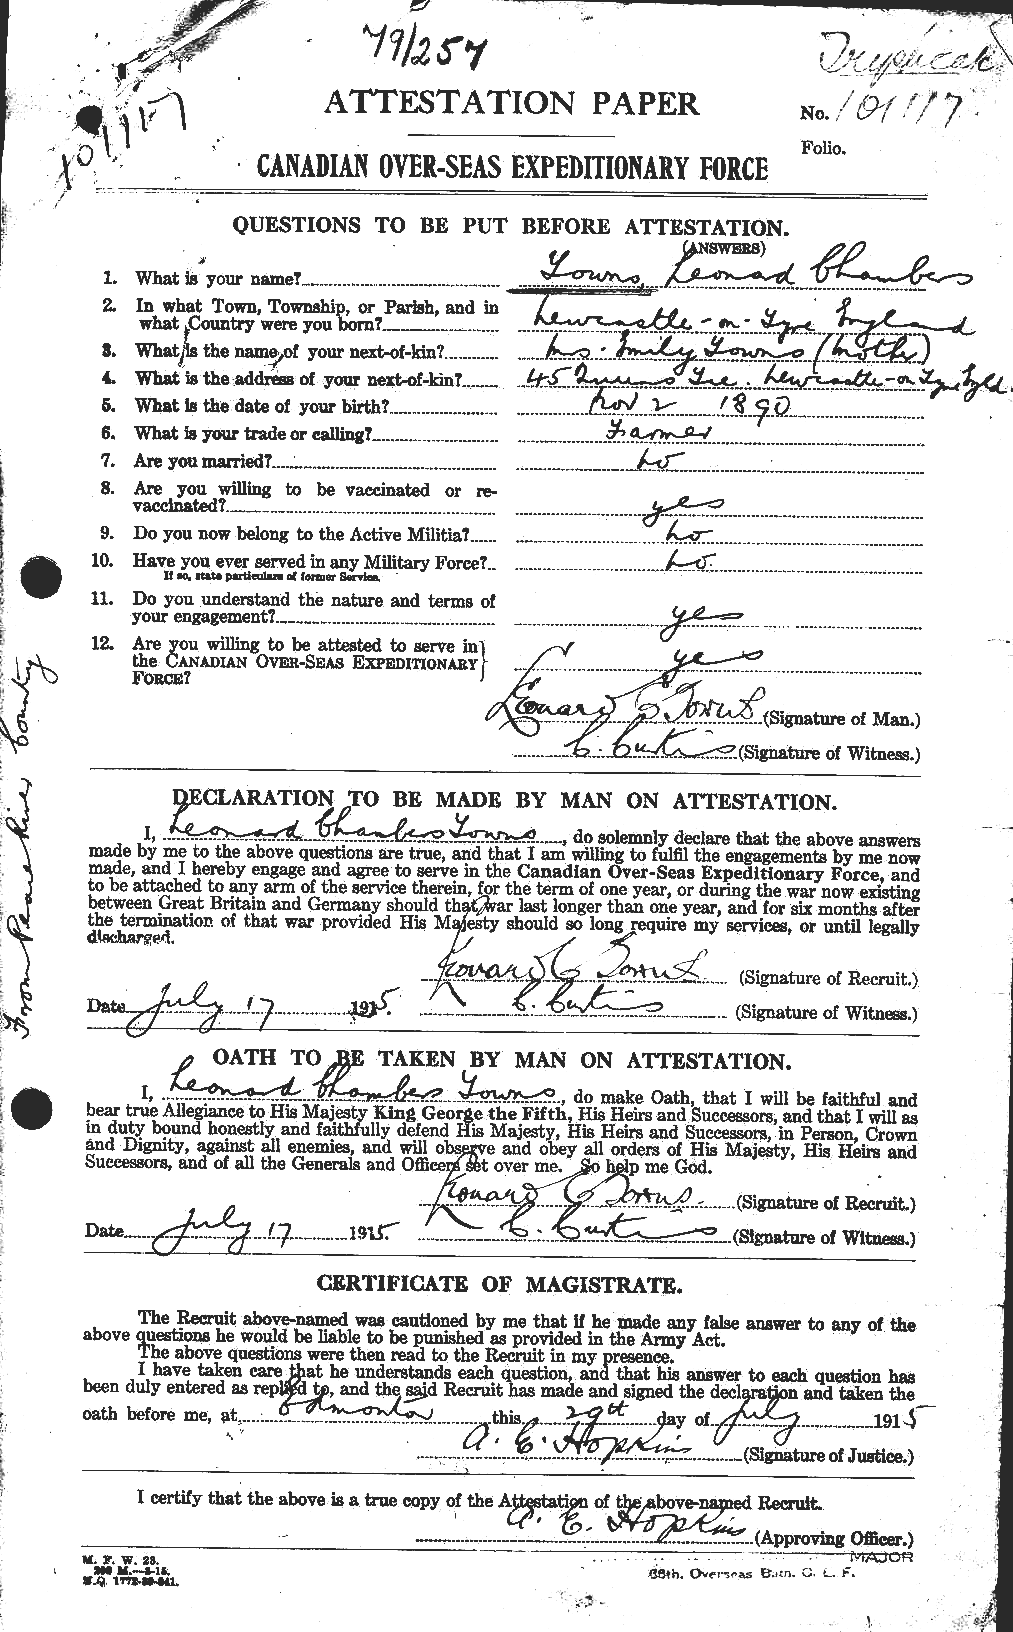 Personnel Records of the First World War - CEF 636359a